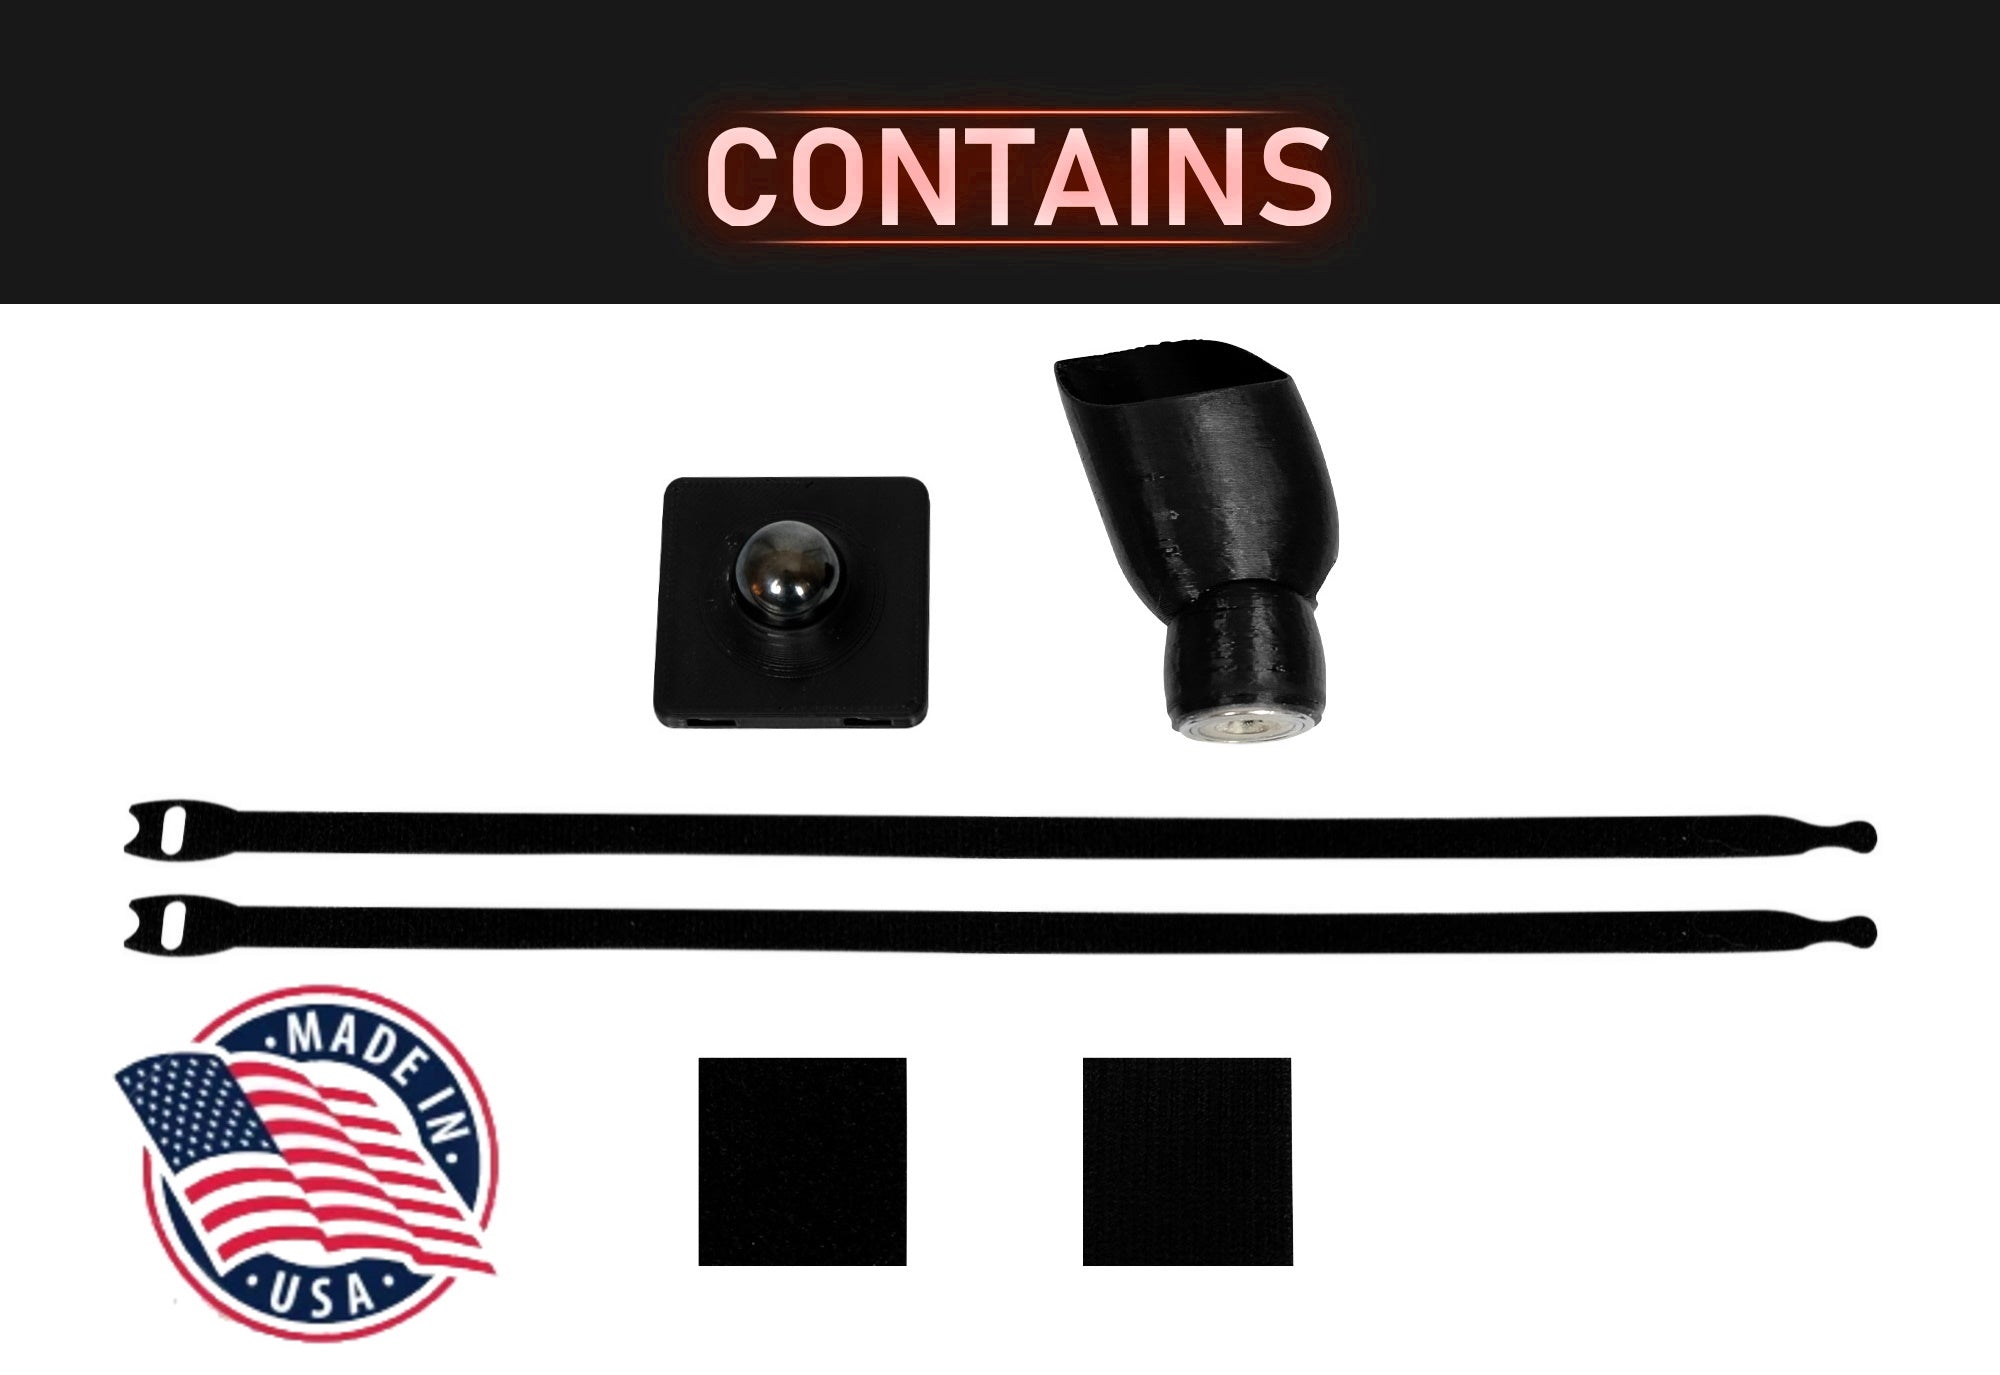 Contains: Spherical base, connecting strips, connecting patch, touch controller cup, Made in the USA